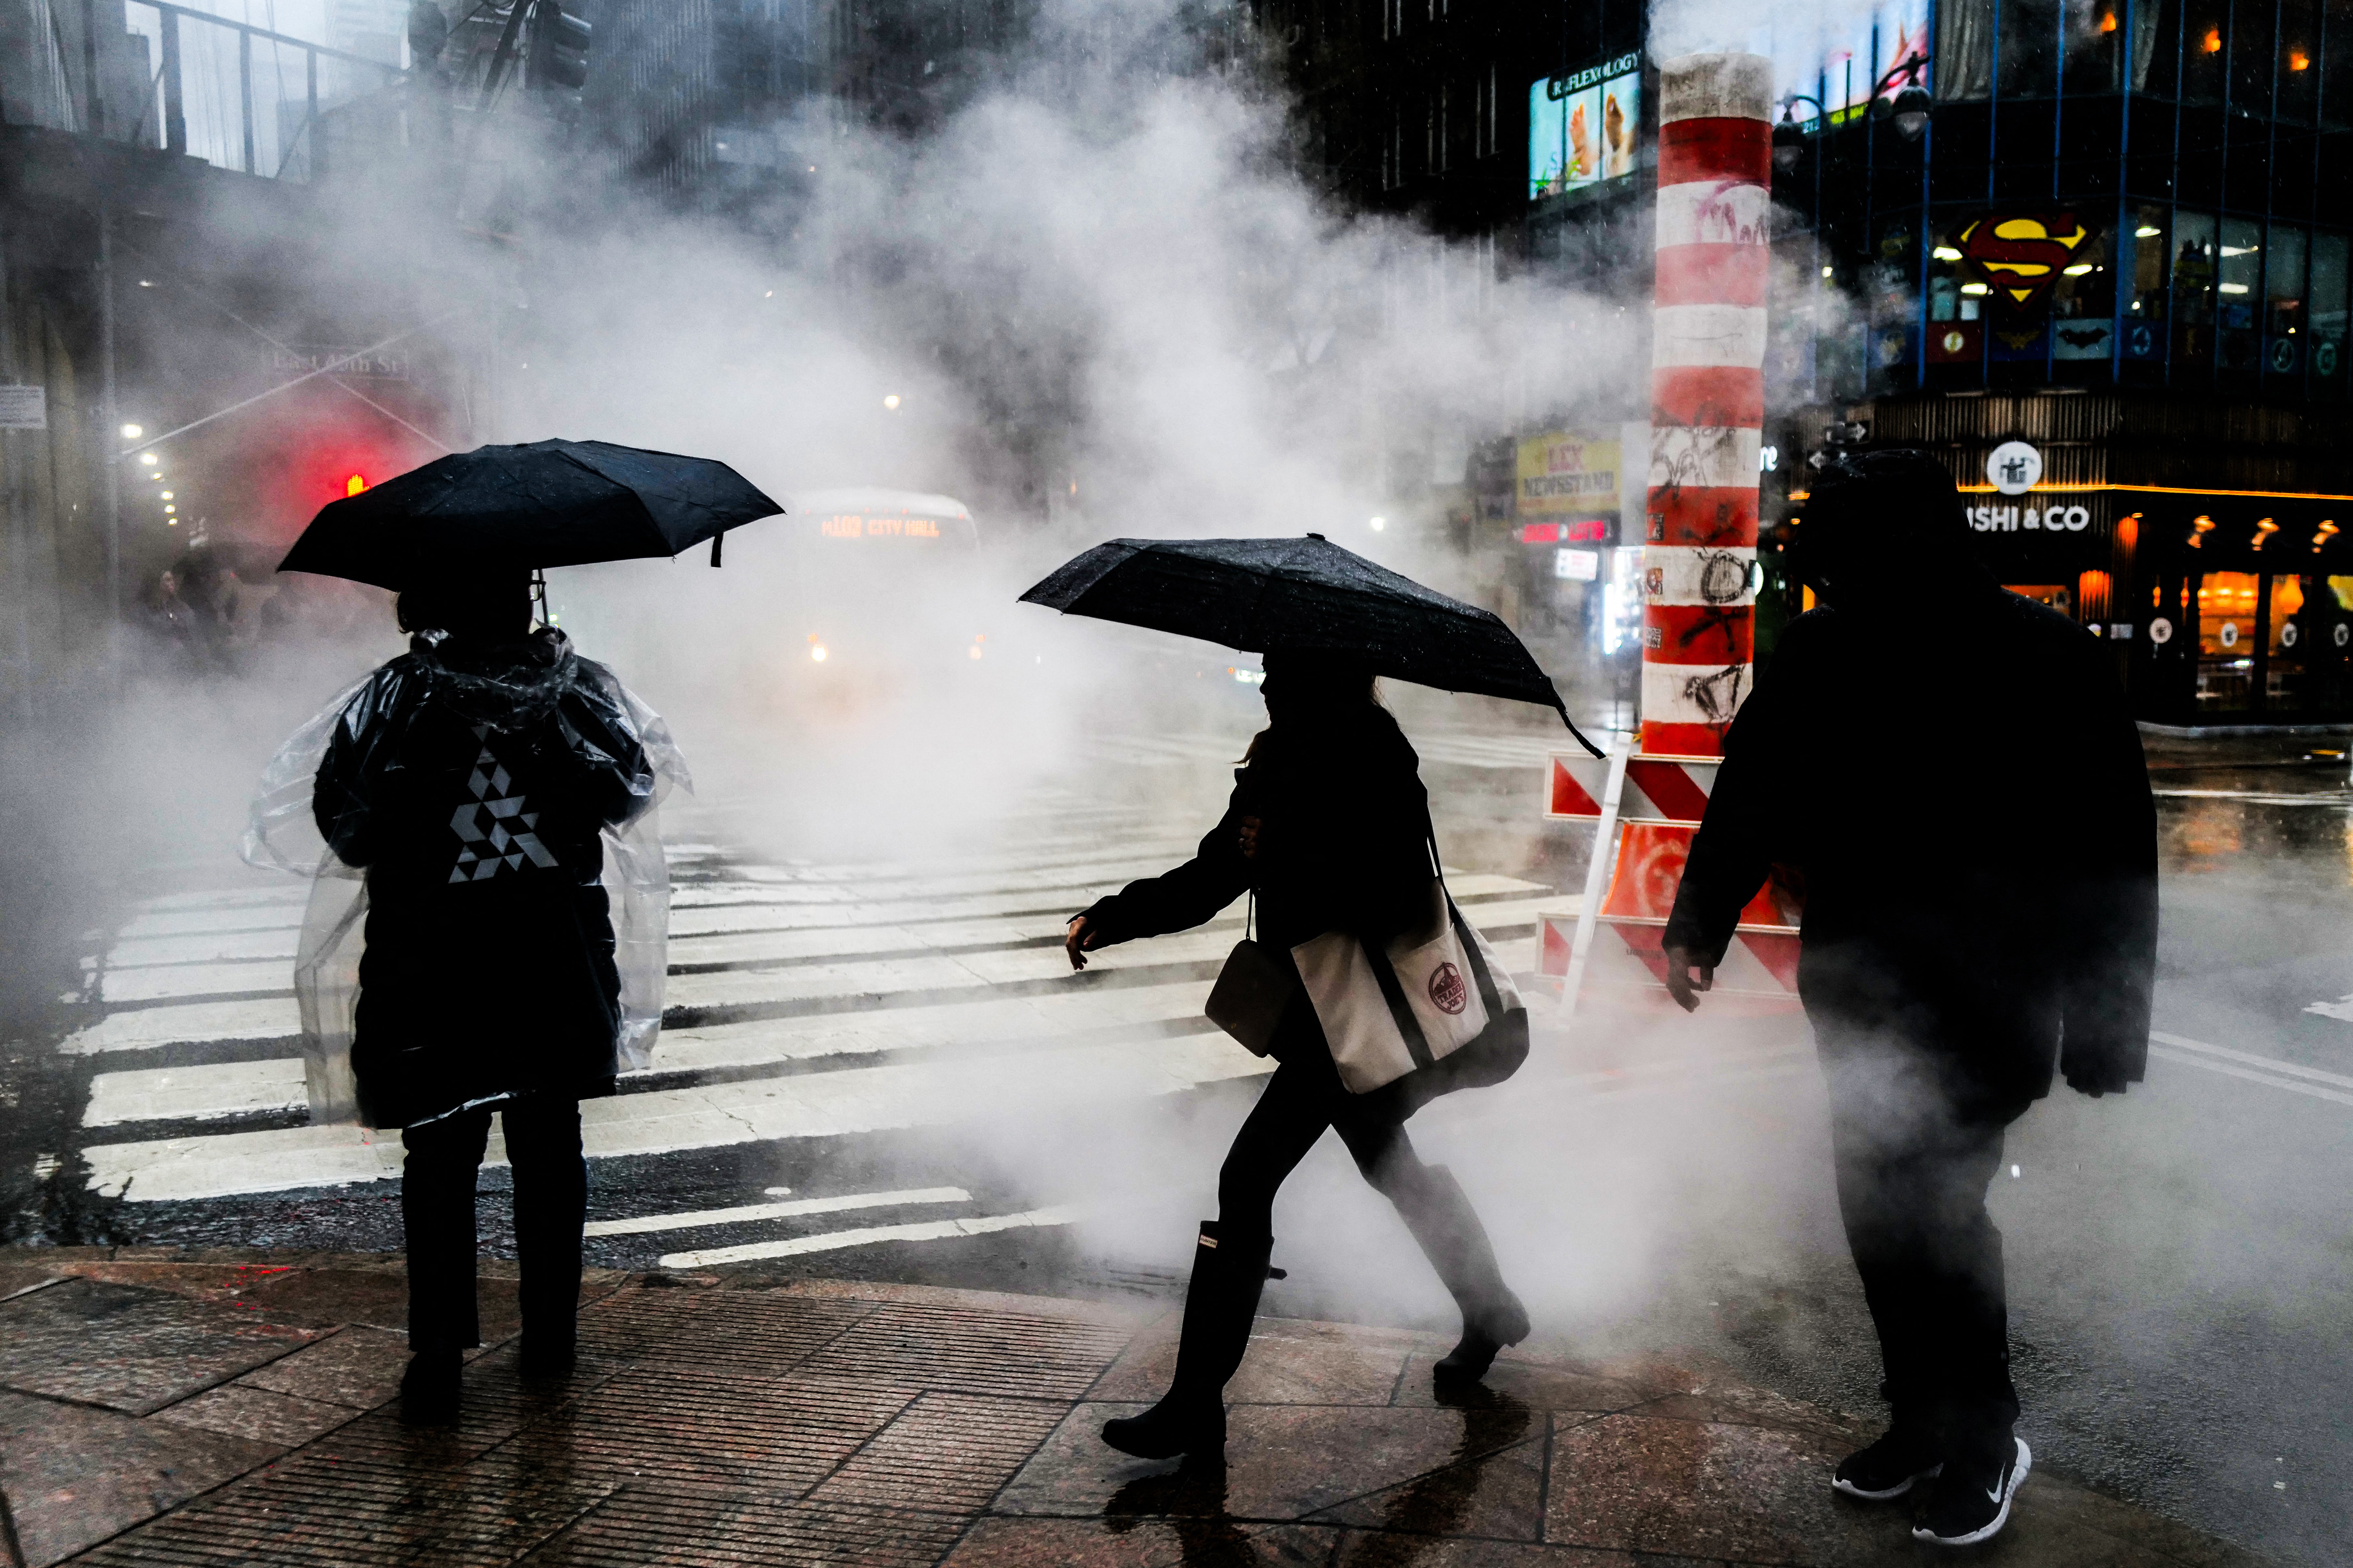 People walk in the street during heavy rain in the Manhattan borough of New York on March 23